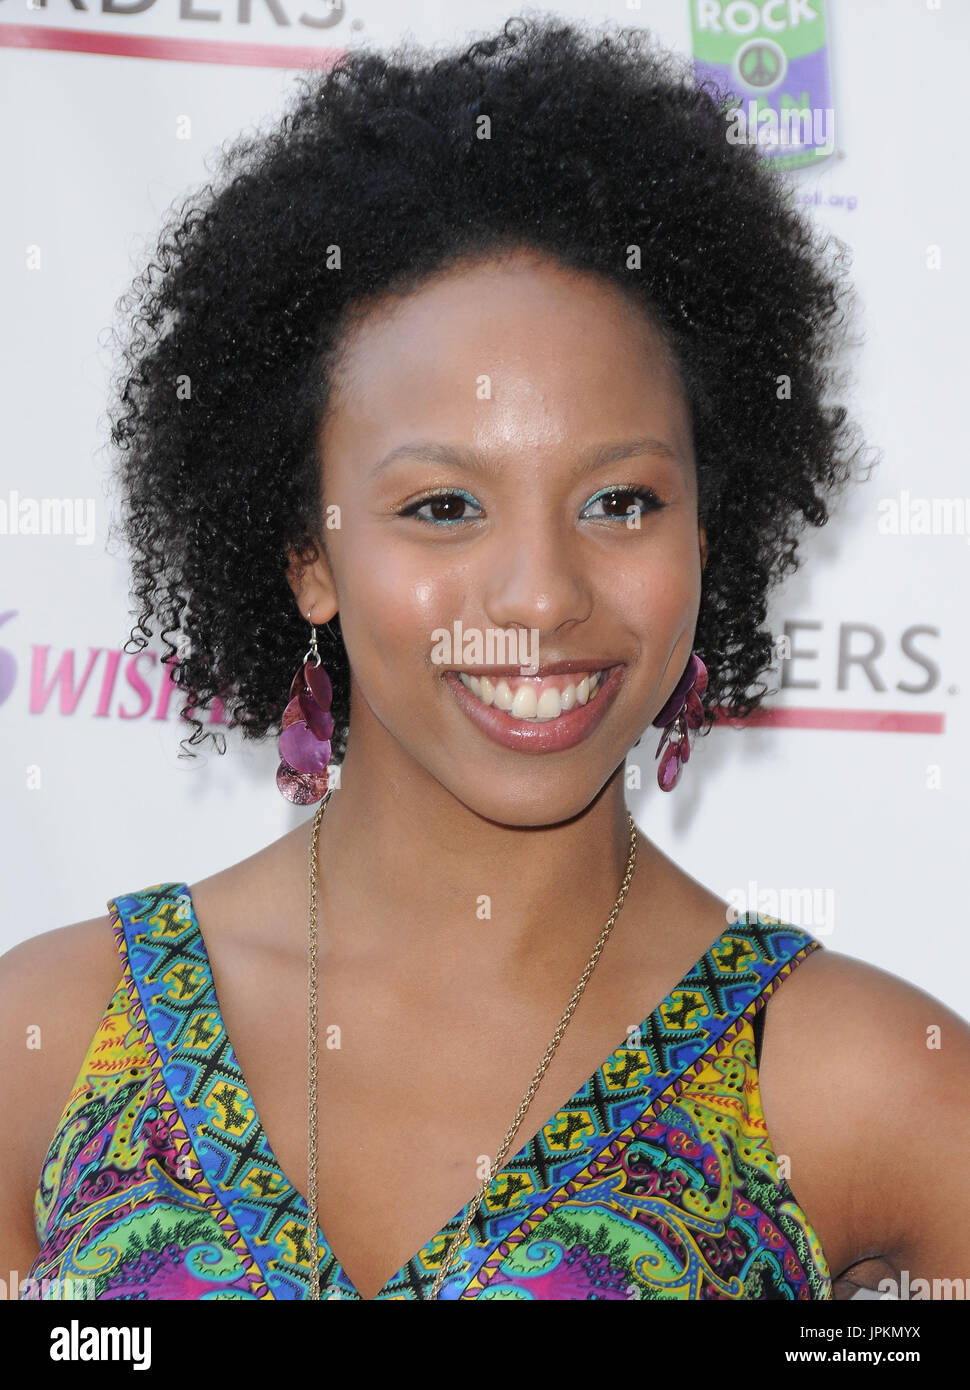 Karissa Tynes at the Los Angeles Premiere of '16 Wishes' held at the Harmony Gold Theater in Los Angeles, CA. The event took place on Tuesday, June 22, 2010. Photo by PRPP Pacific Rim Photo Press. Stock Photo